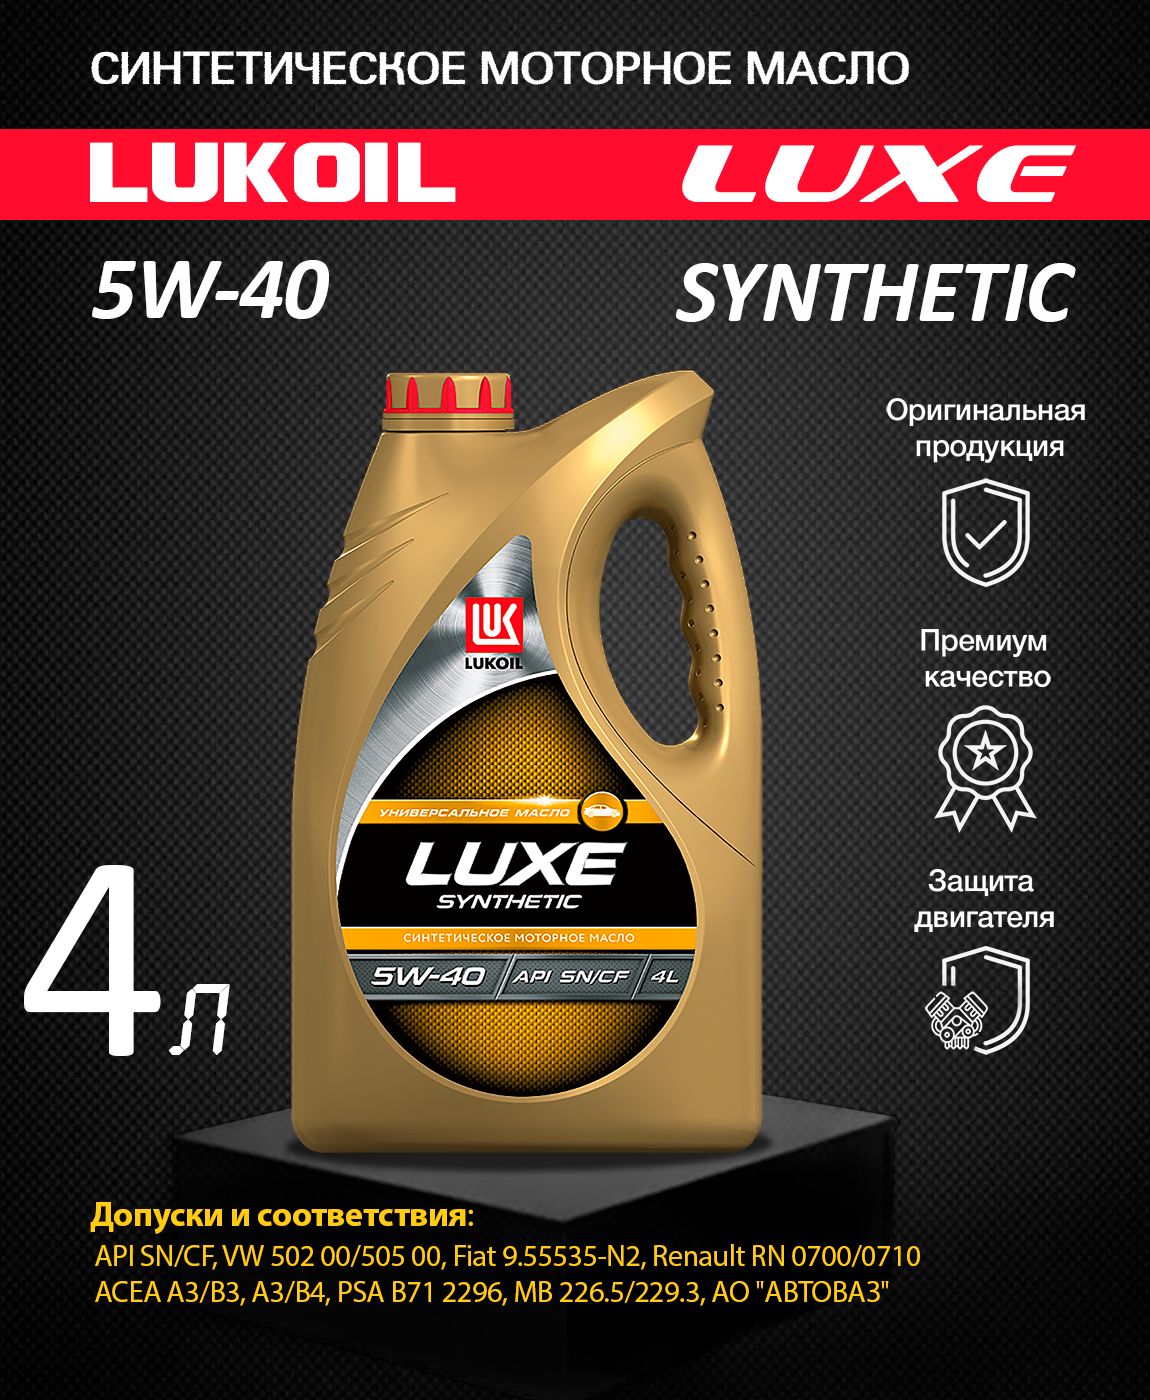 Масло лукойл 5 40 отзывы. Lukoil Luxe Synthetic 5w-40. Lukoil Luxe Synthetic 5w-40 (ACEA a3/b4-08; API SM/CF). 207465 Лукойл. Автозаправка Лукойл.